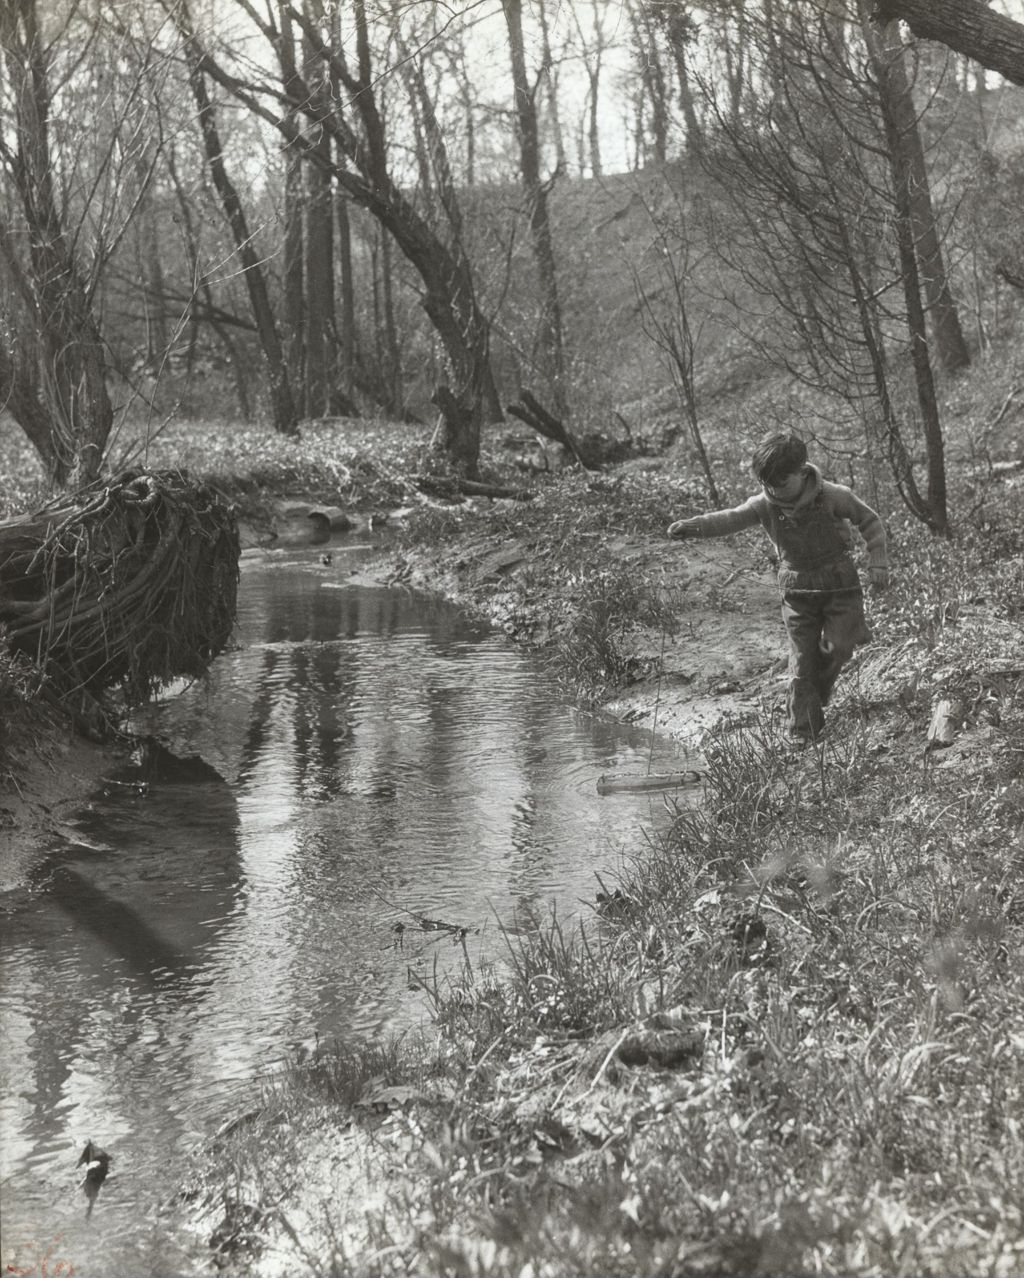 Miniature of Boy playing in water along stream bank